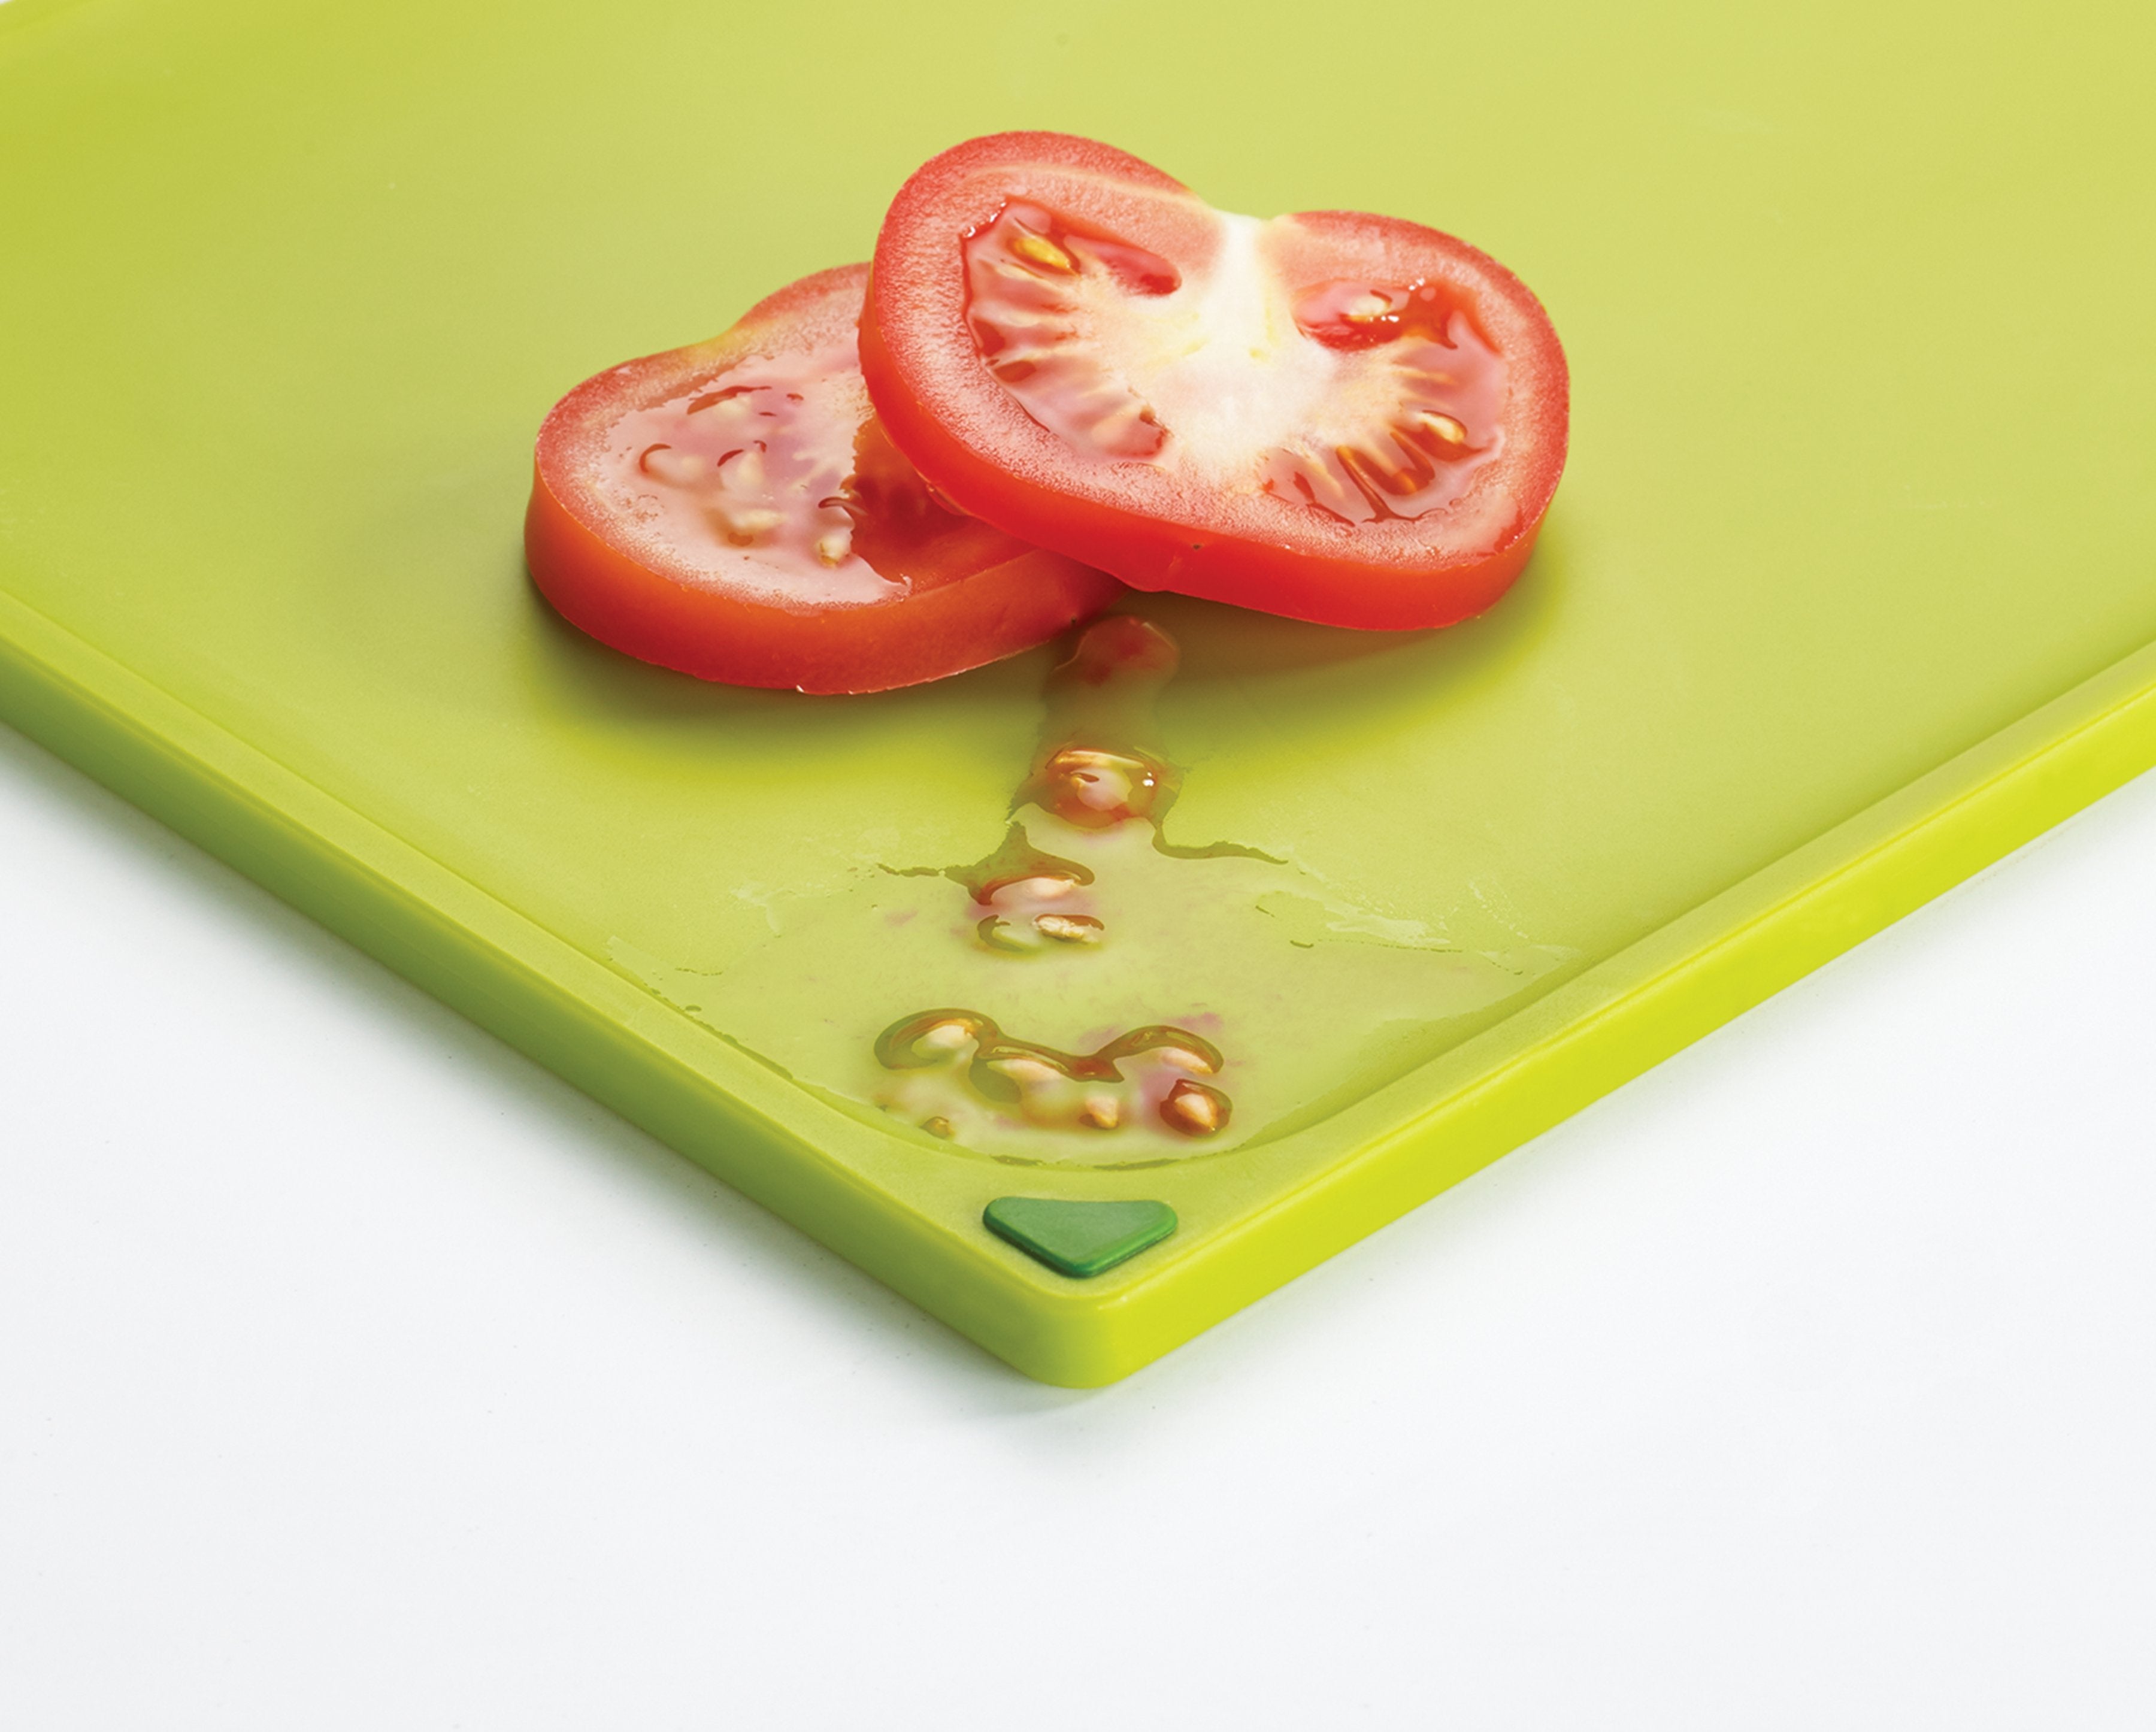 BEON.COM.AU  Since its launch in 2008, Index™ has been a worldwide bestseller, helping people reduce cross-contamination of their food with a simple, yet effective, colour-coded system of boards.  Set of 4 colour-coded, non-slip chopping boards plus storage case Designed to prevent cross-contamination of dif... Joseph Joseph at BEON.COM.AU